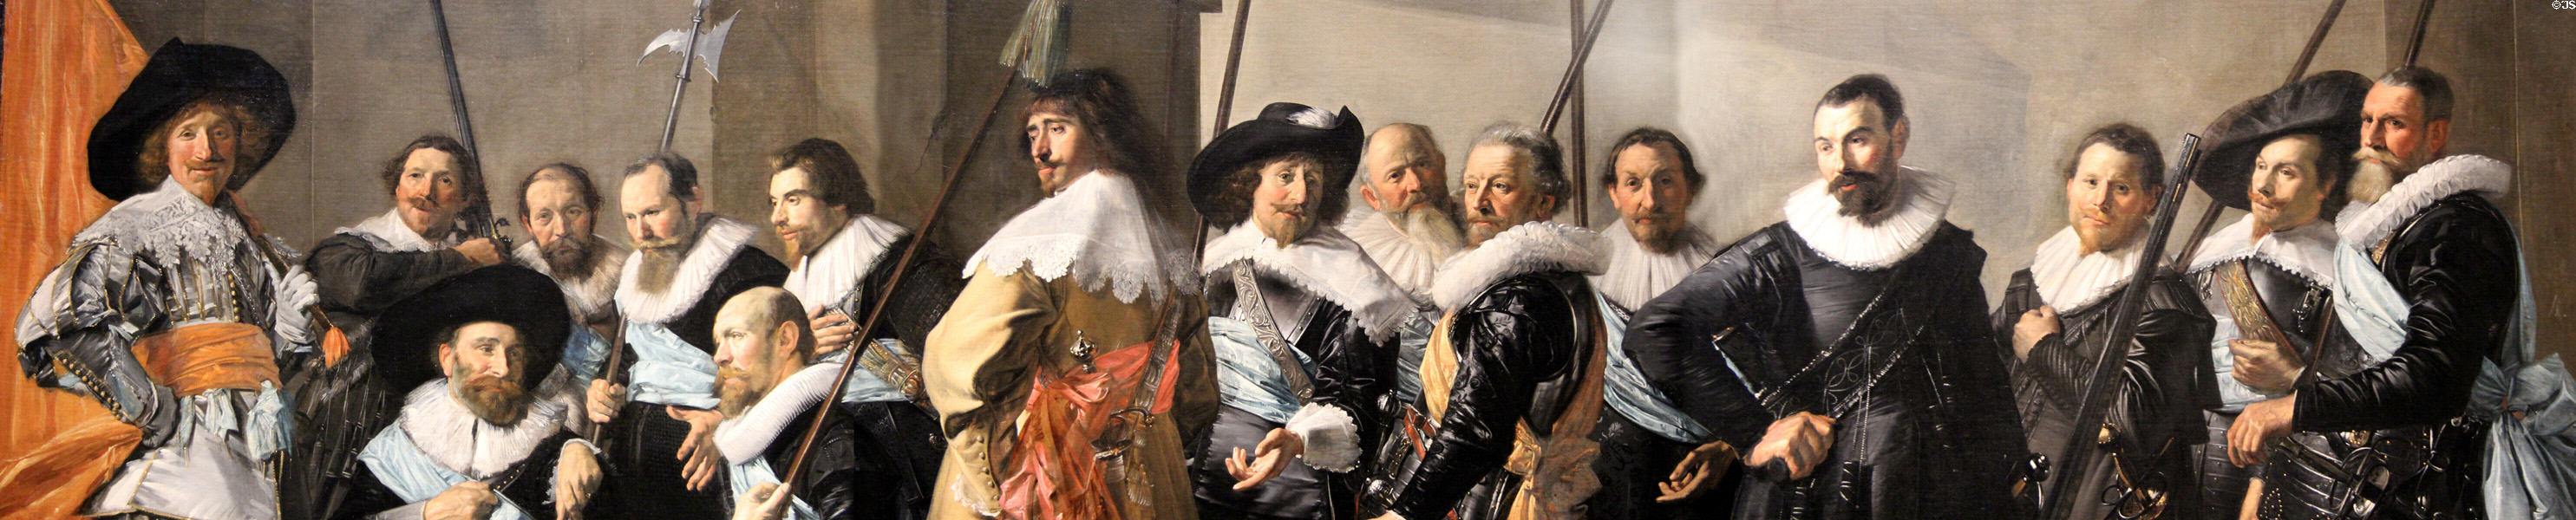 Detail of Militia Company of District XI under Command of Captain Reynier Reael (aka Meagre Company) painting (1637) by Frans Hals & Pieter Codde at Rijksmuseum. Amsterdam, NL.